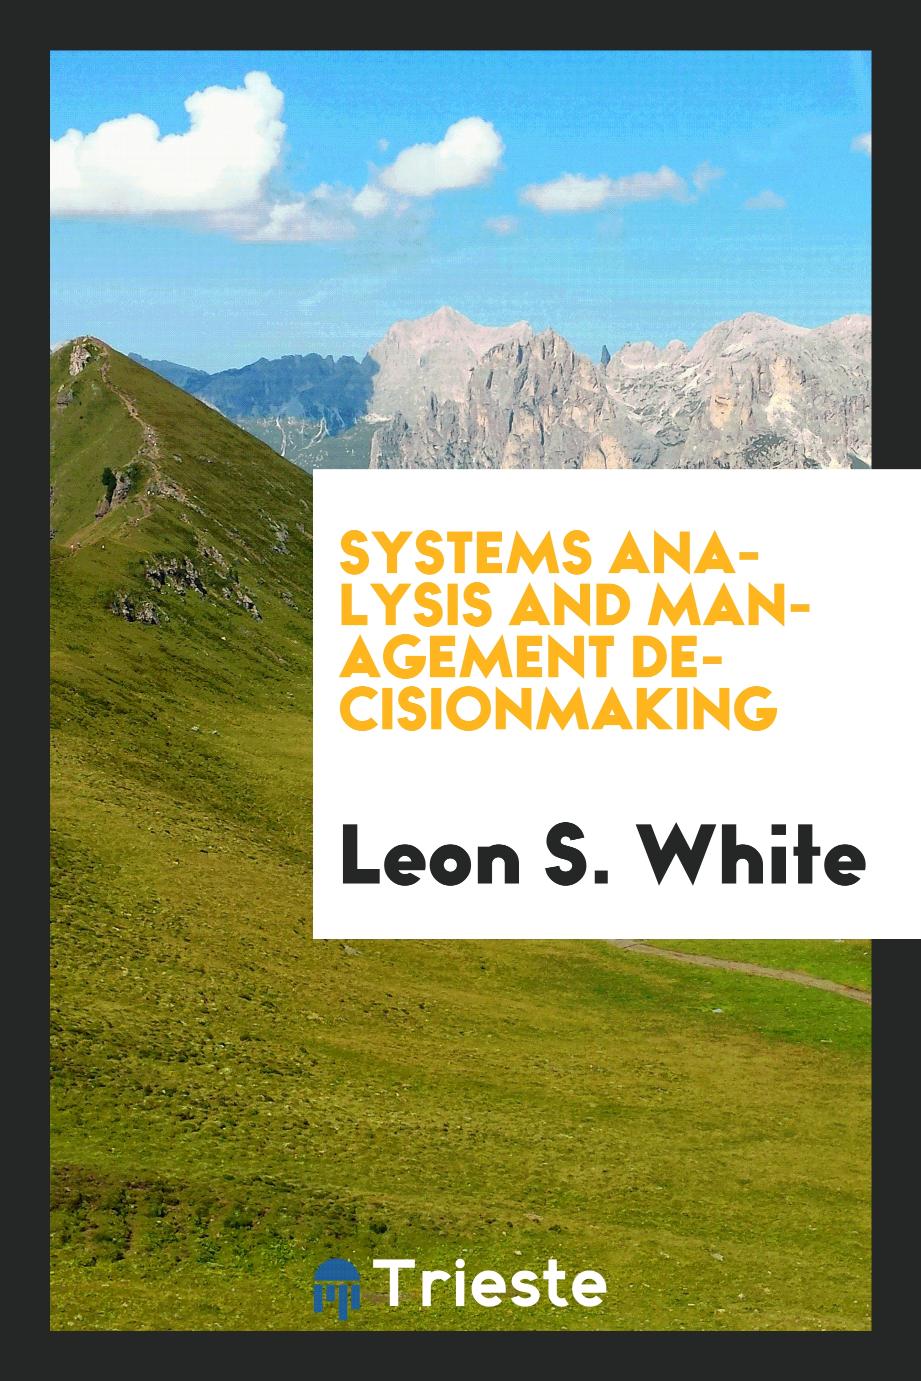 Systems analysis and management decisionmaking